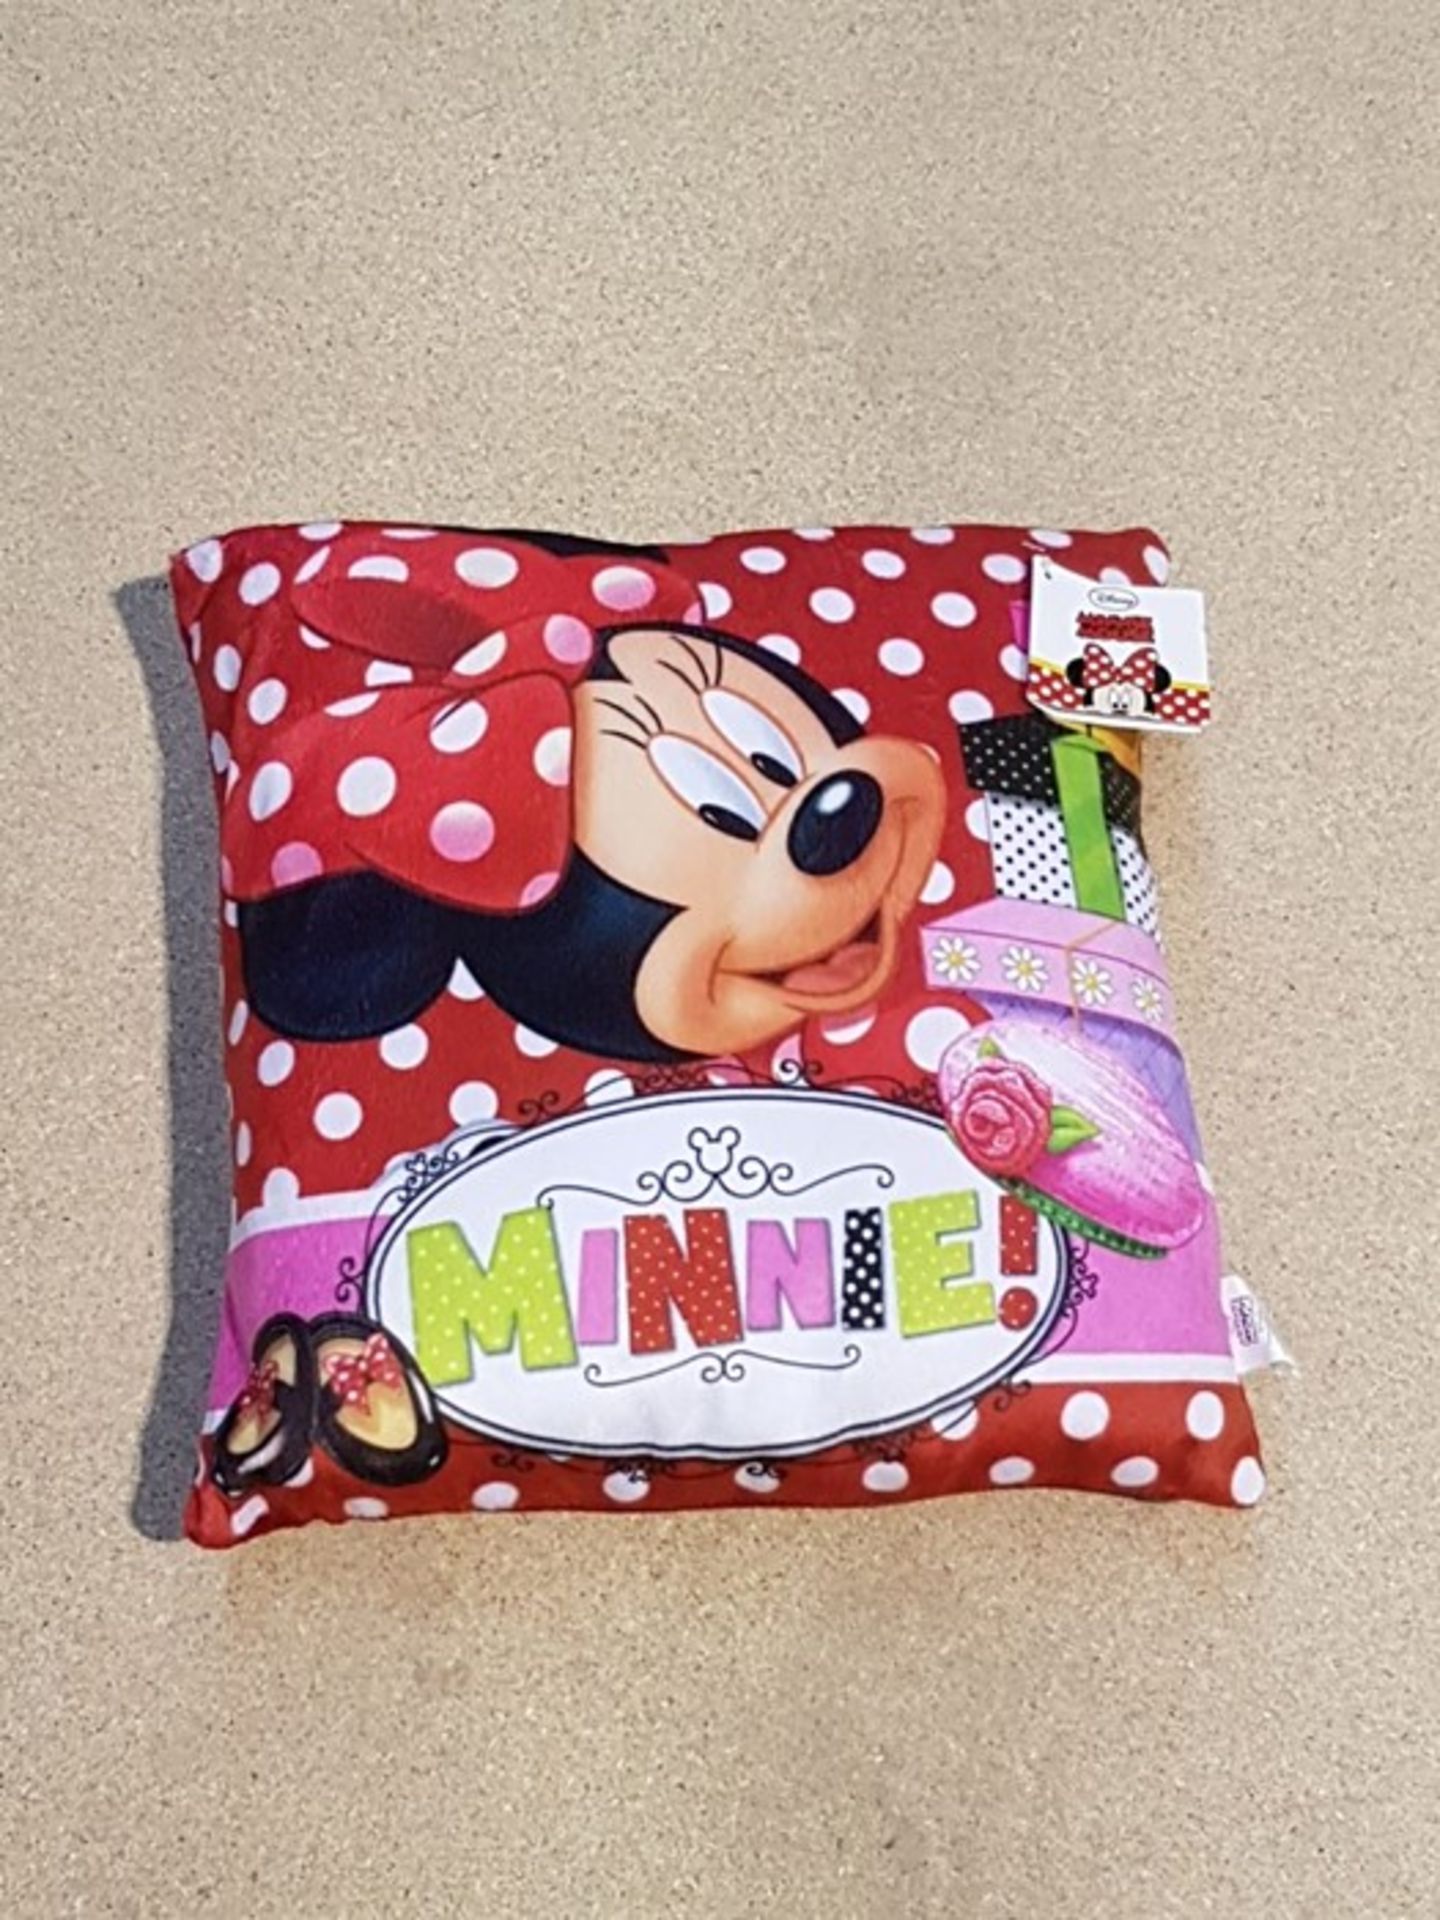 1 BAGGED DISNEY JUNIOR MINNIE MOUSE SOFT CUSHION / RRP £6.99 (VIEWING HIGHLY RECOMMENDED)